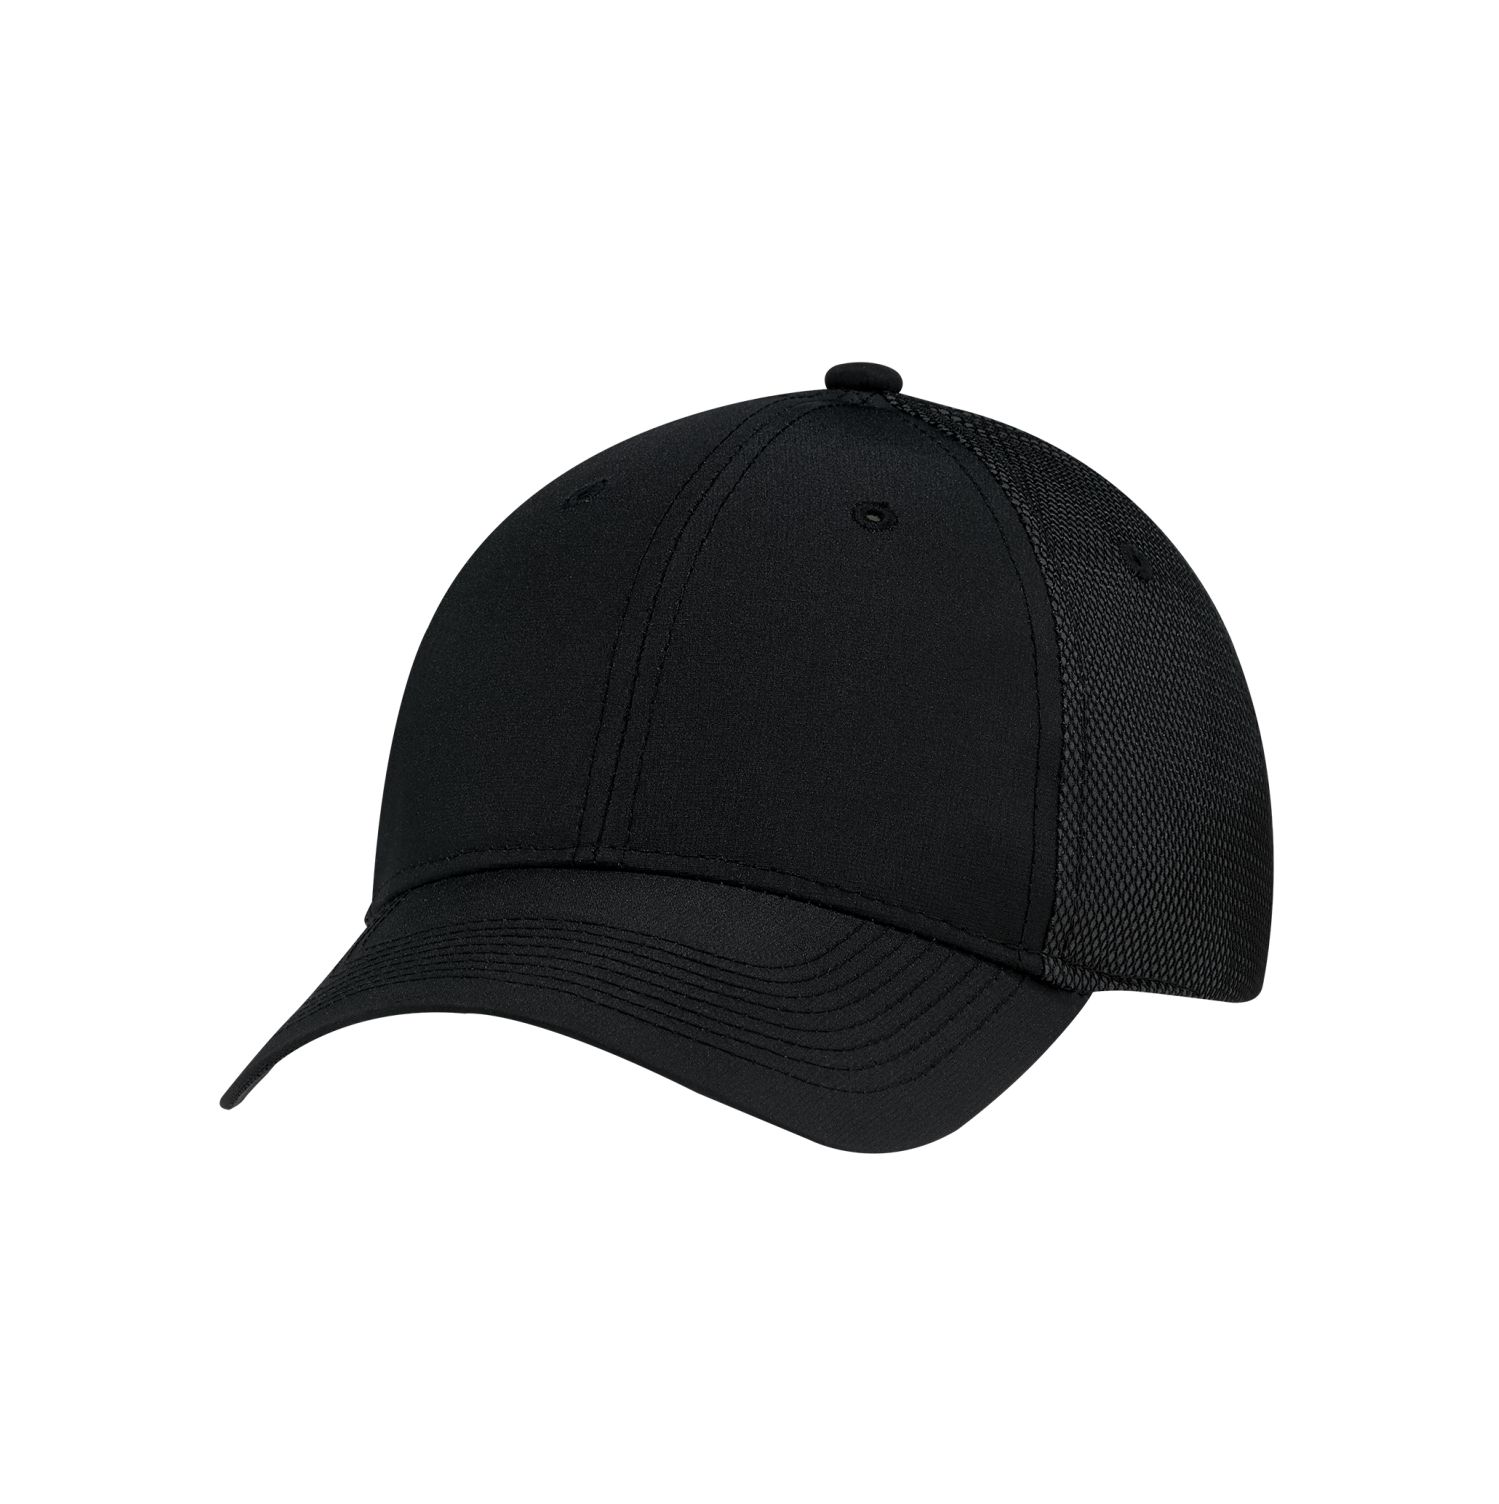 AJM Polyester Rip Stop / Polyester Rip Stop Bonded Mesh 6 Panel Constructed Full-Fit Hat #1B637M Black / Black